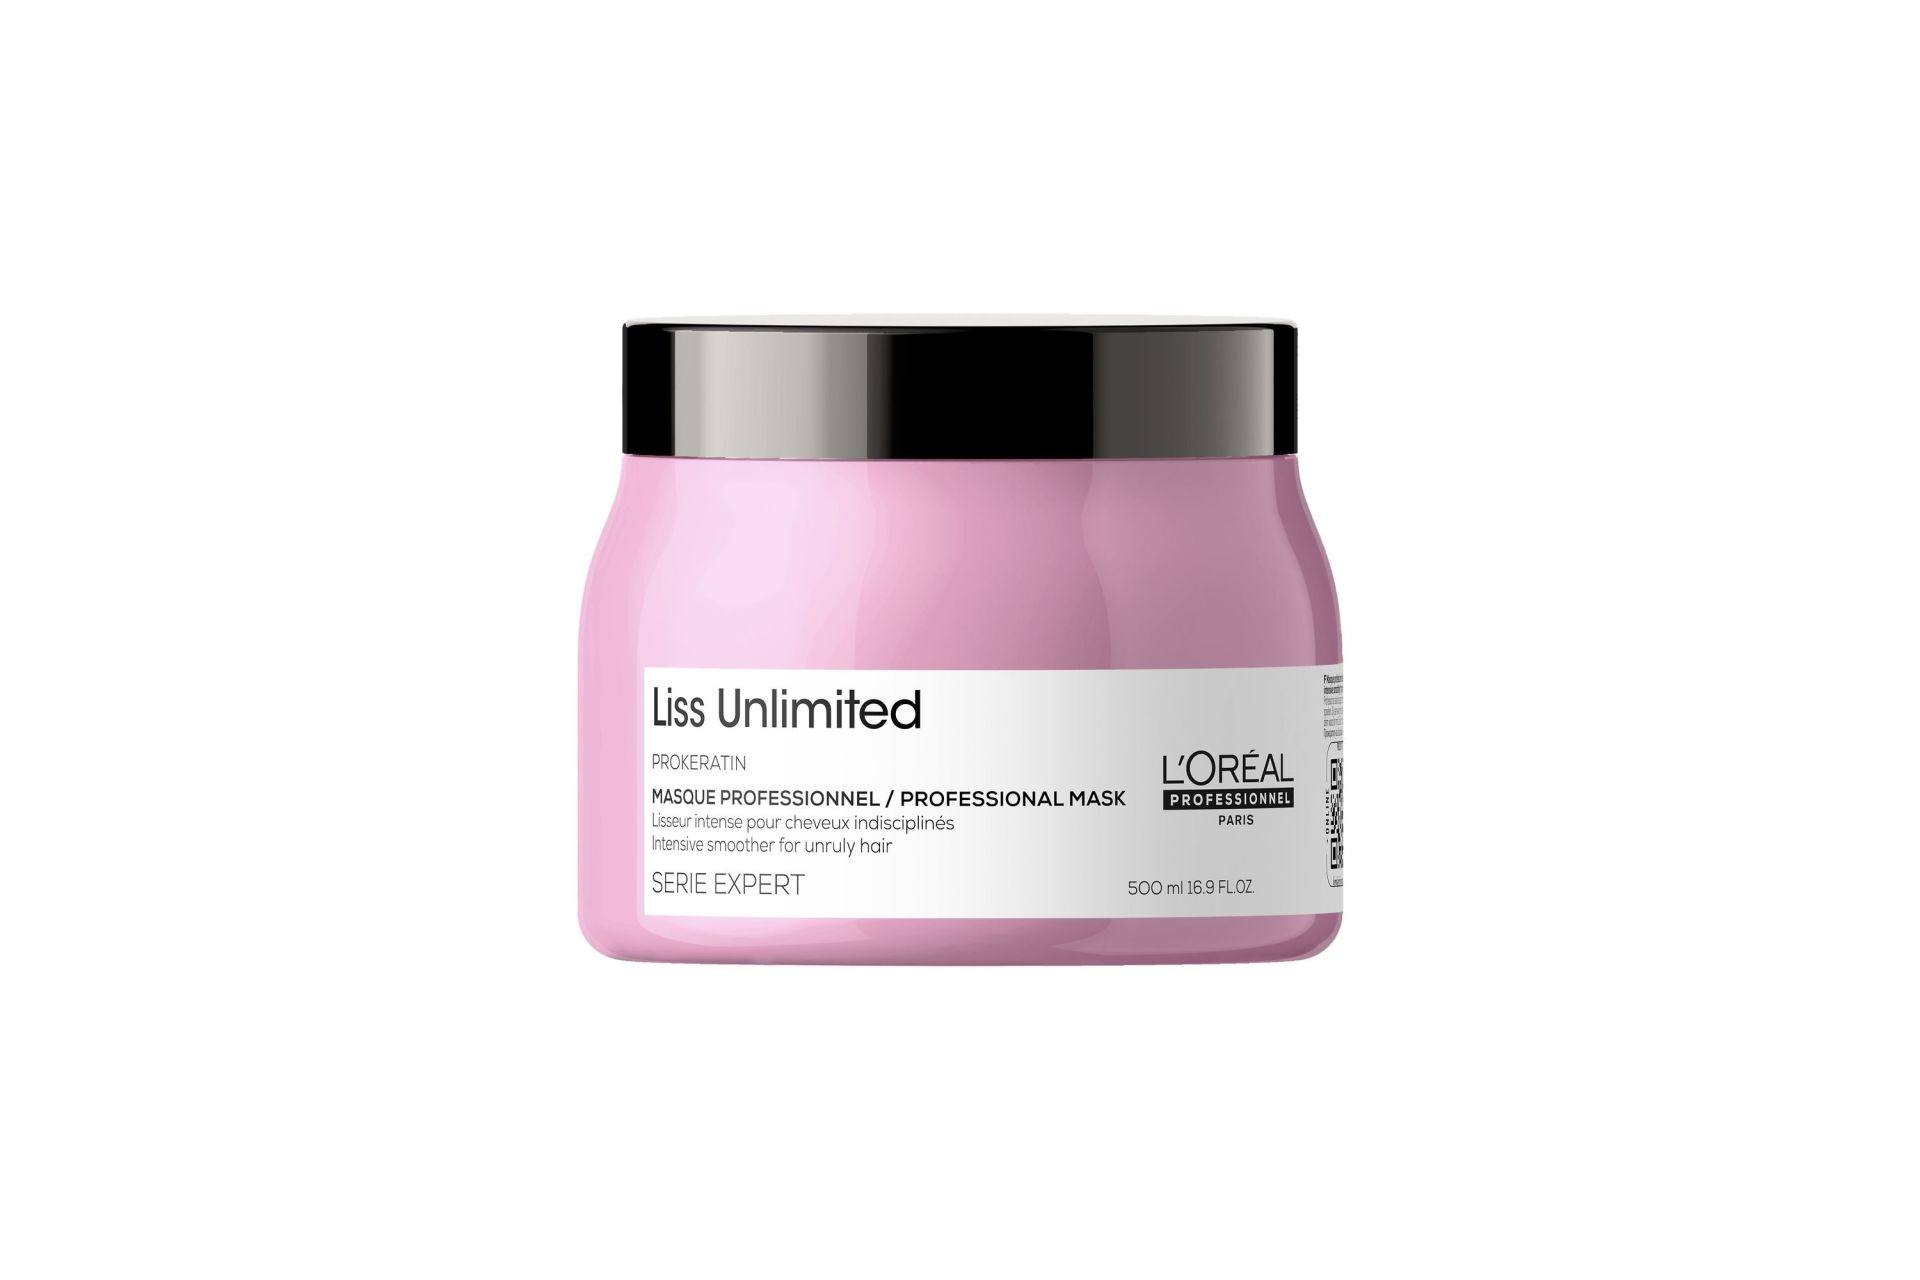 Loreal Professionnel Serie Expert SE21 Liss Unlimited Prokeratin Masque 500 Ml.